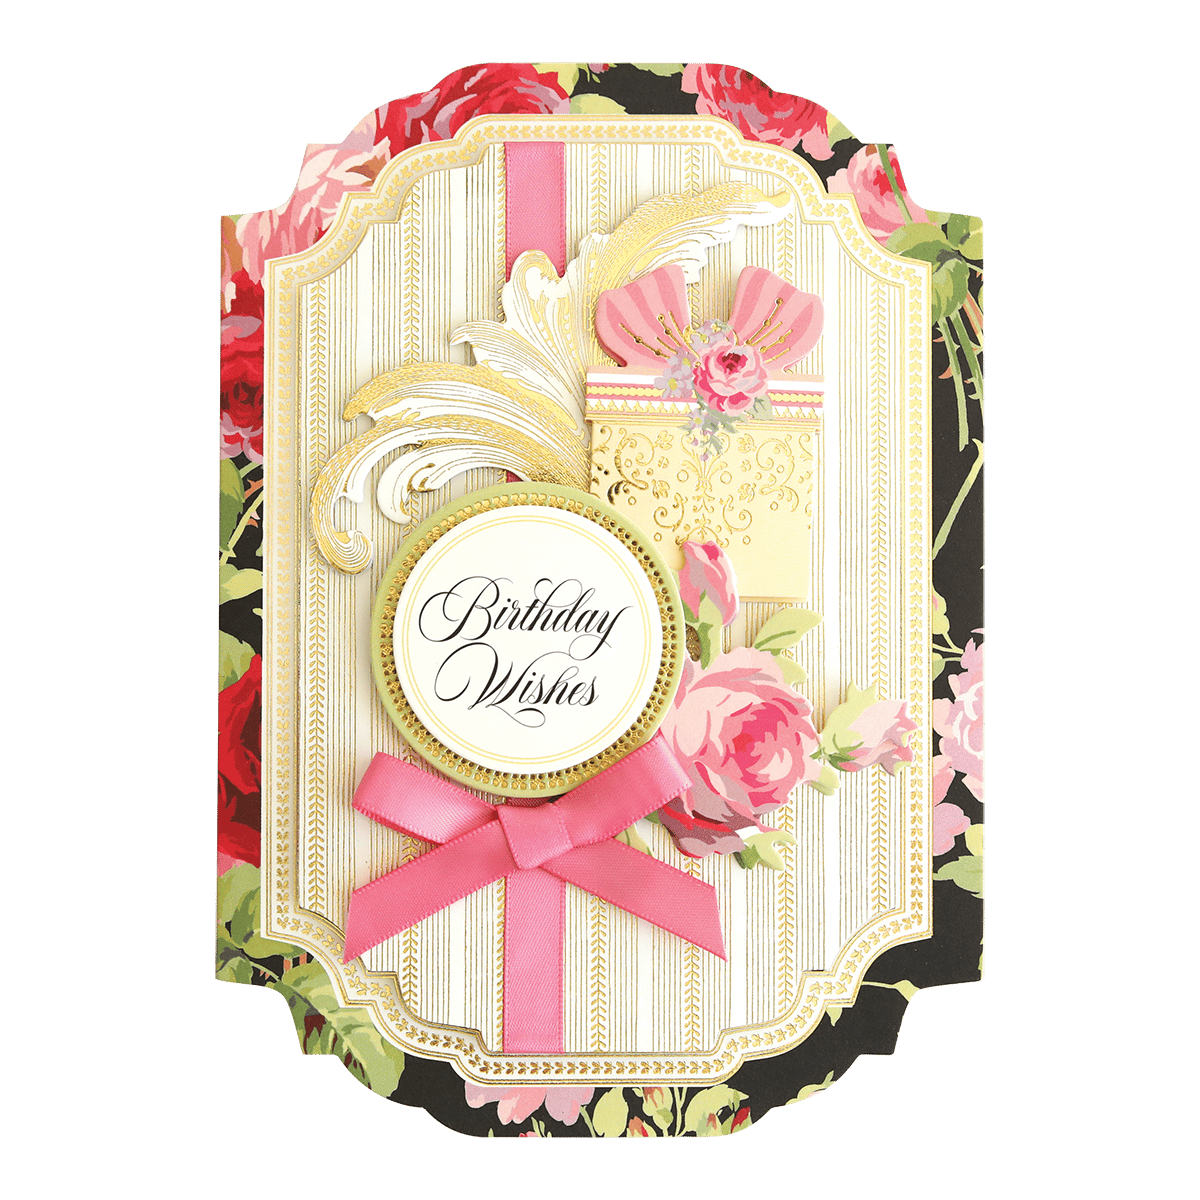 a birthday card with roses and a ribbon.